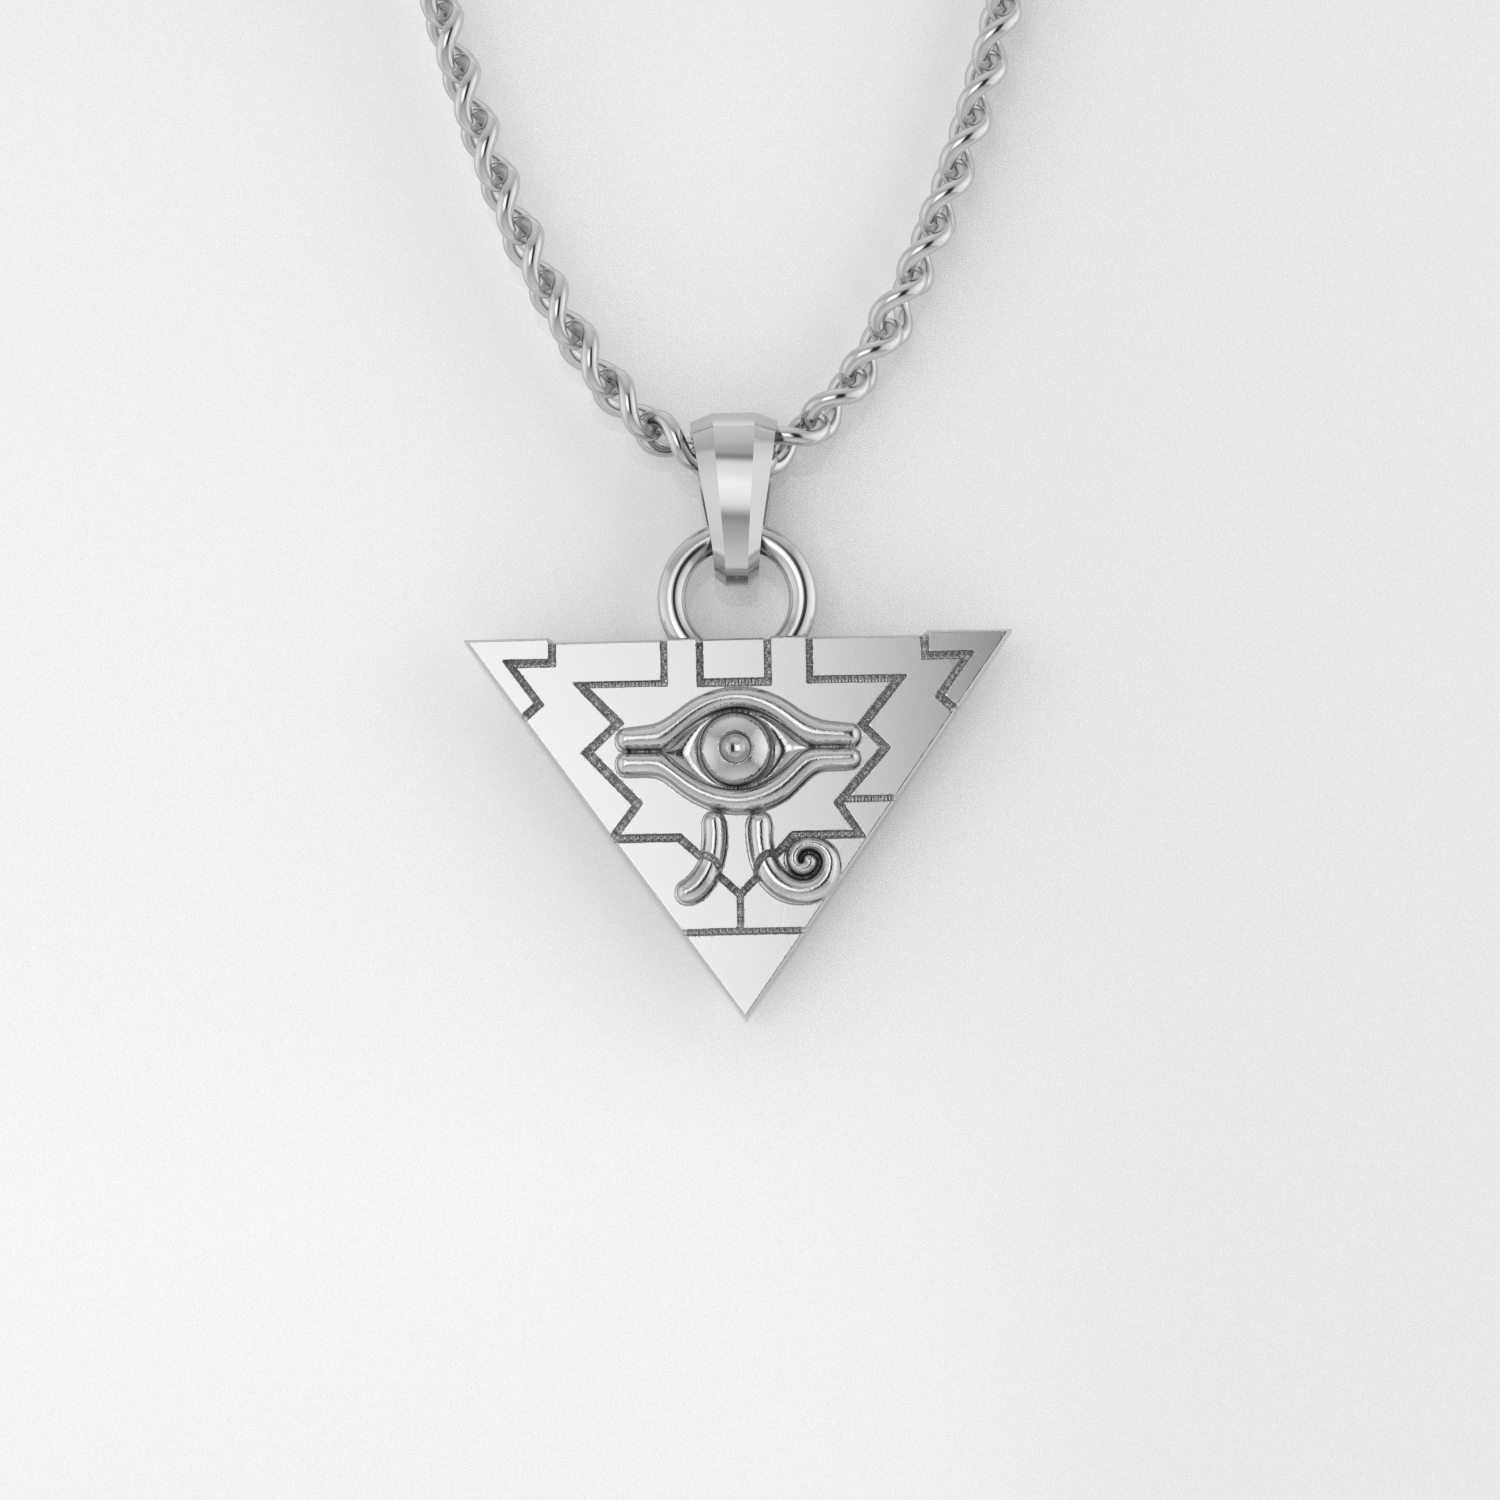 New Drop: Mister x Yu-Gi-Oh! Drop 1 - The Millennium Collection. Featuring  12 officially licensed pieces - earrings, necklaces & a ring... | Instagram